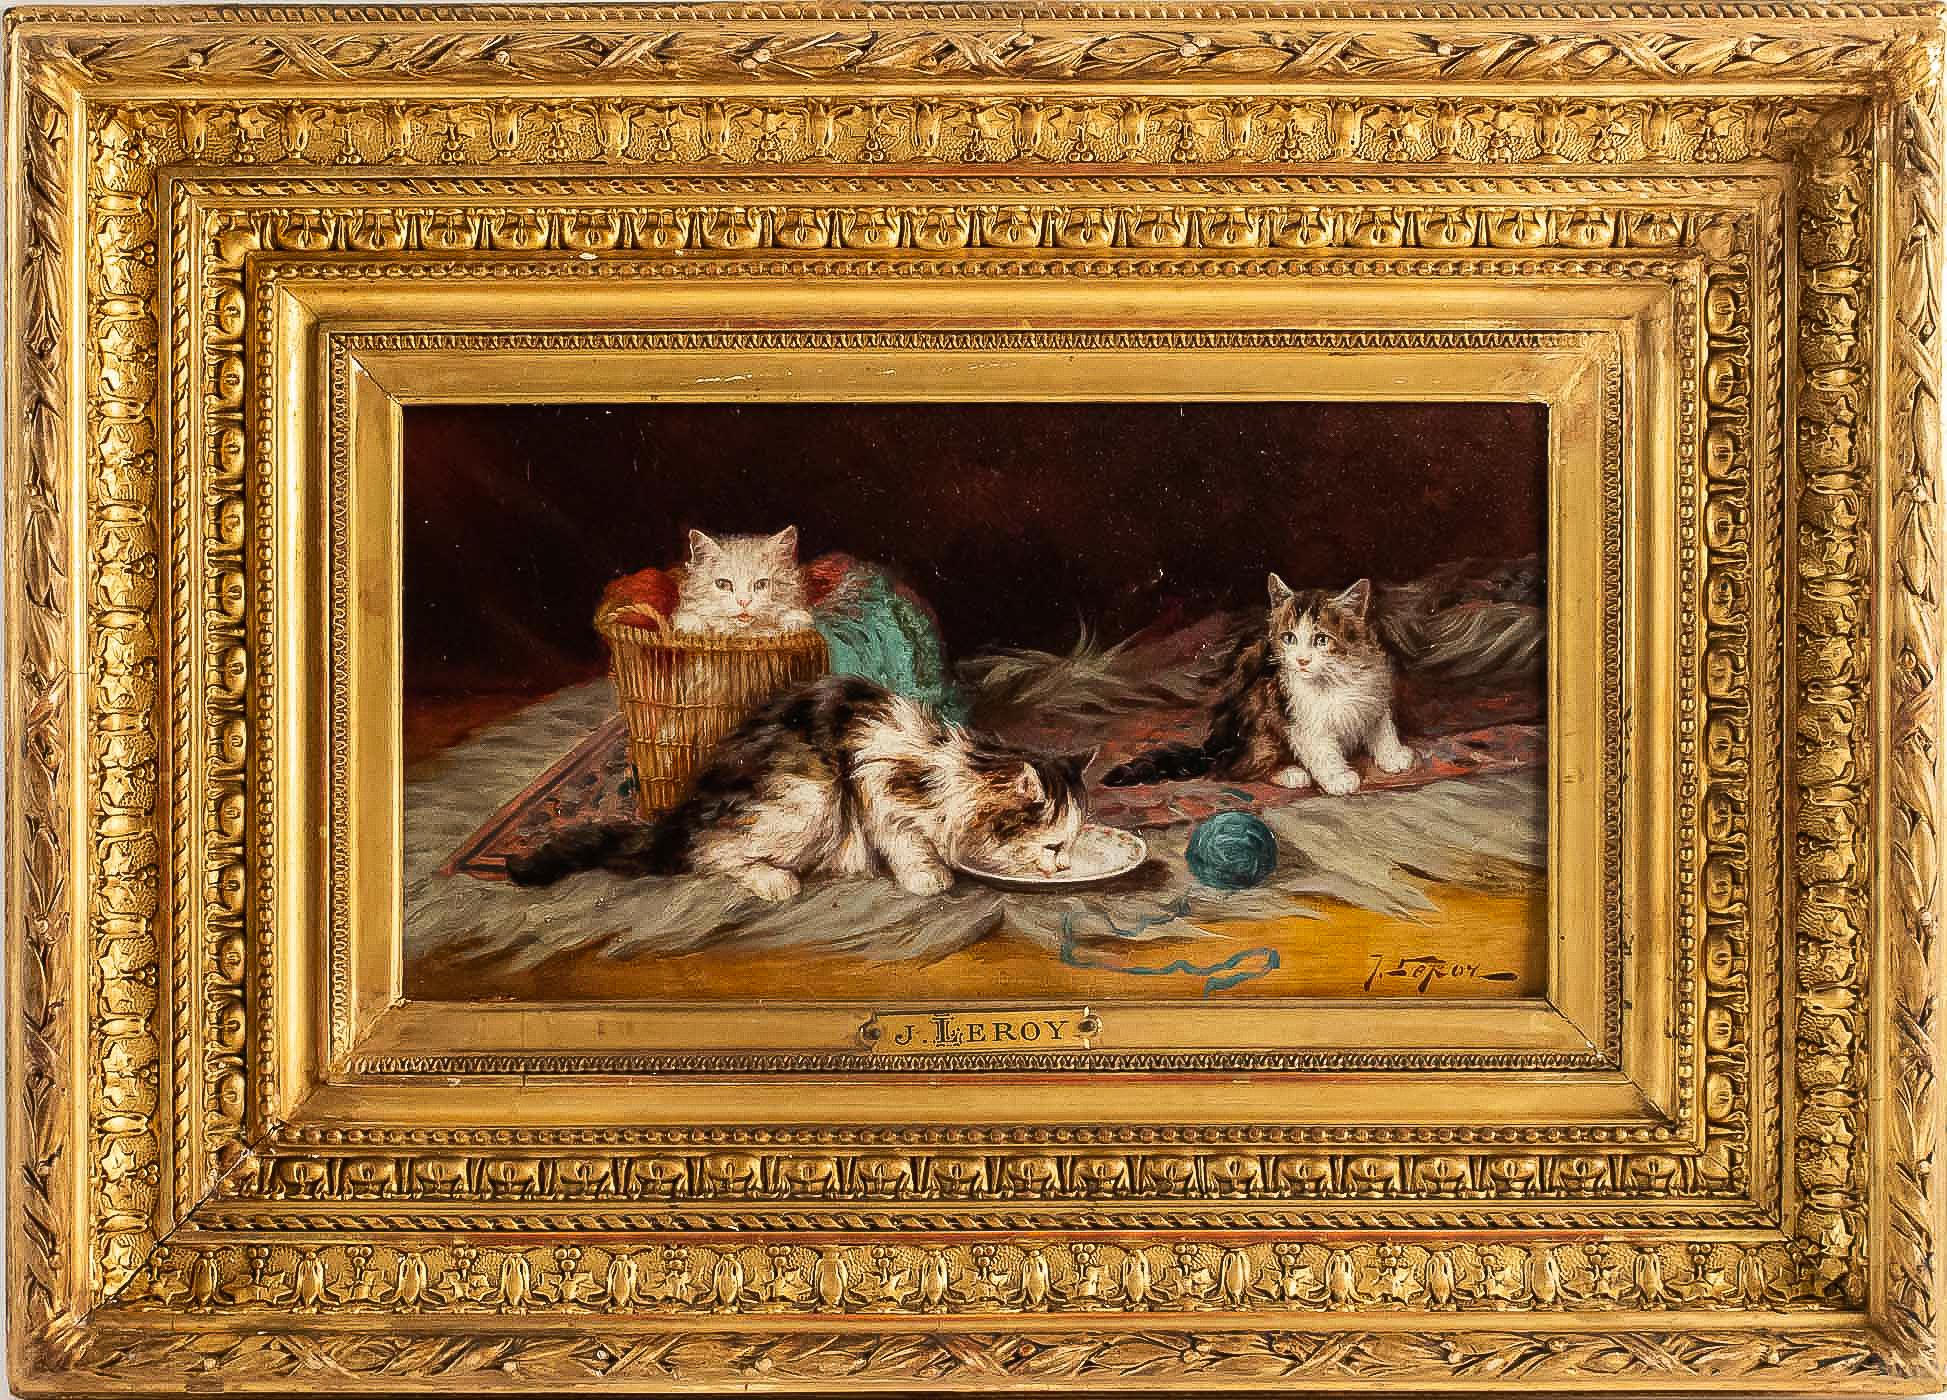 Jules Gustave Leroy oil on panel three cats and a ball of wool, circa 1890-1900.

A lovely and decorative small painting, oil on panel depicting three cats and a ball of wool.

Our painting is signed on the lower right by a famous French painter